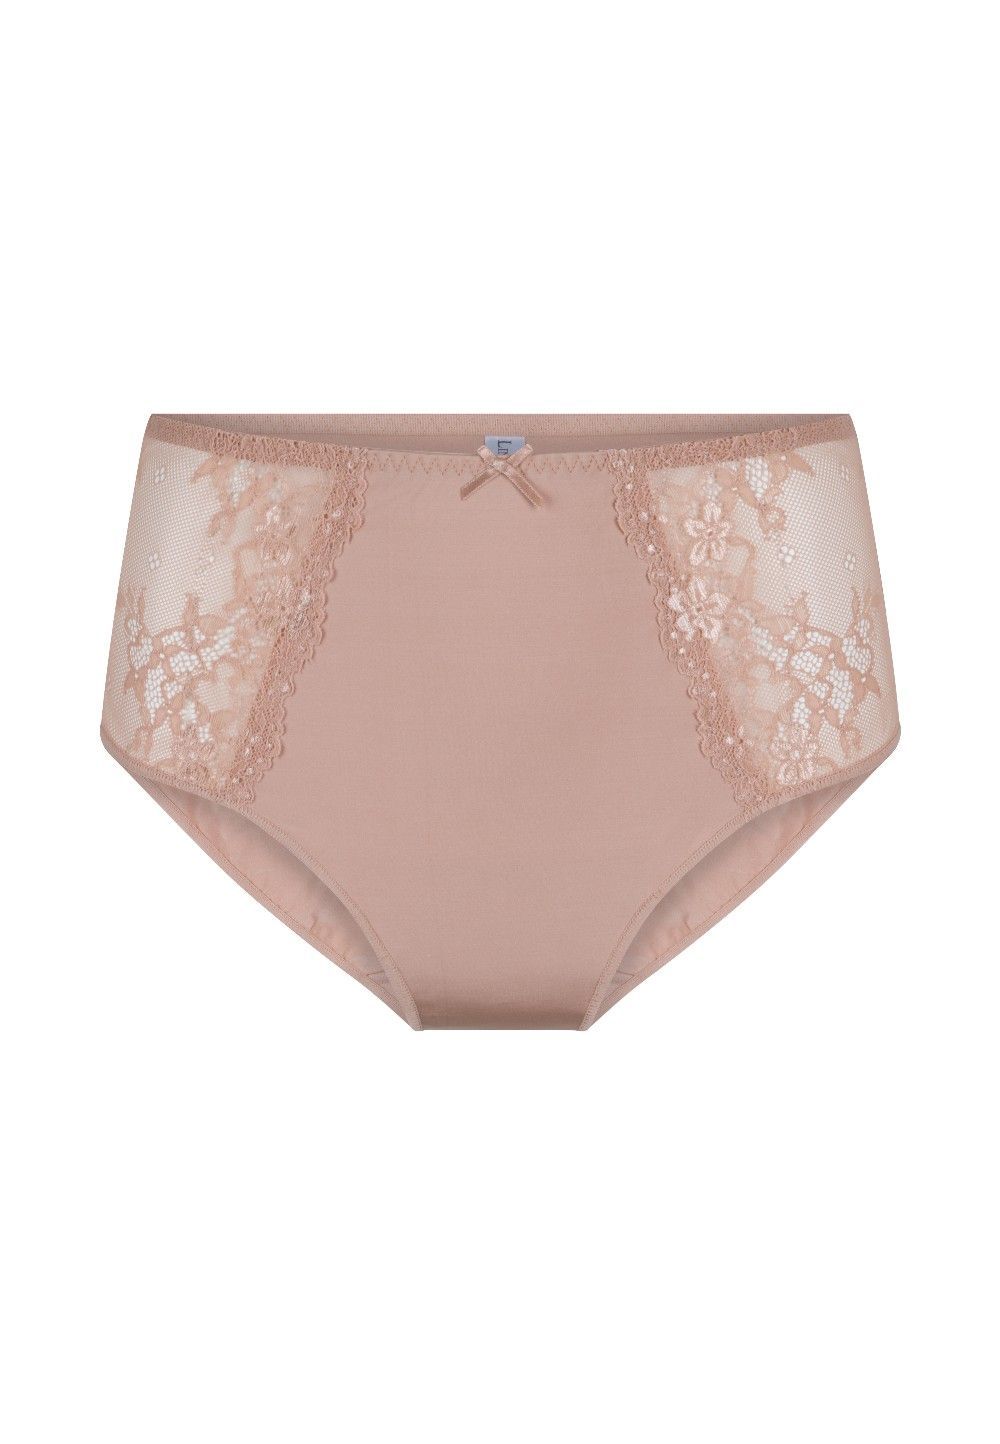 LingaDore Daily High Waist Brief - Briefs  Available at Illusions Lingerie